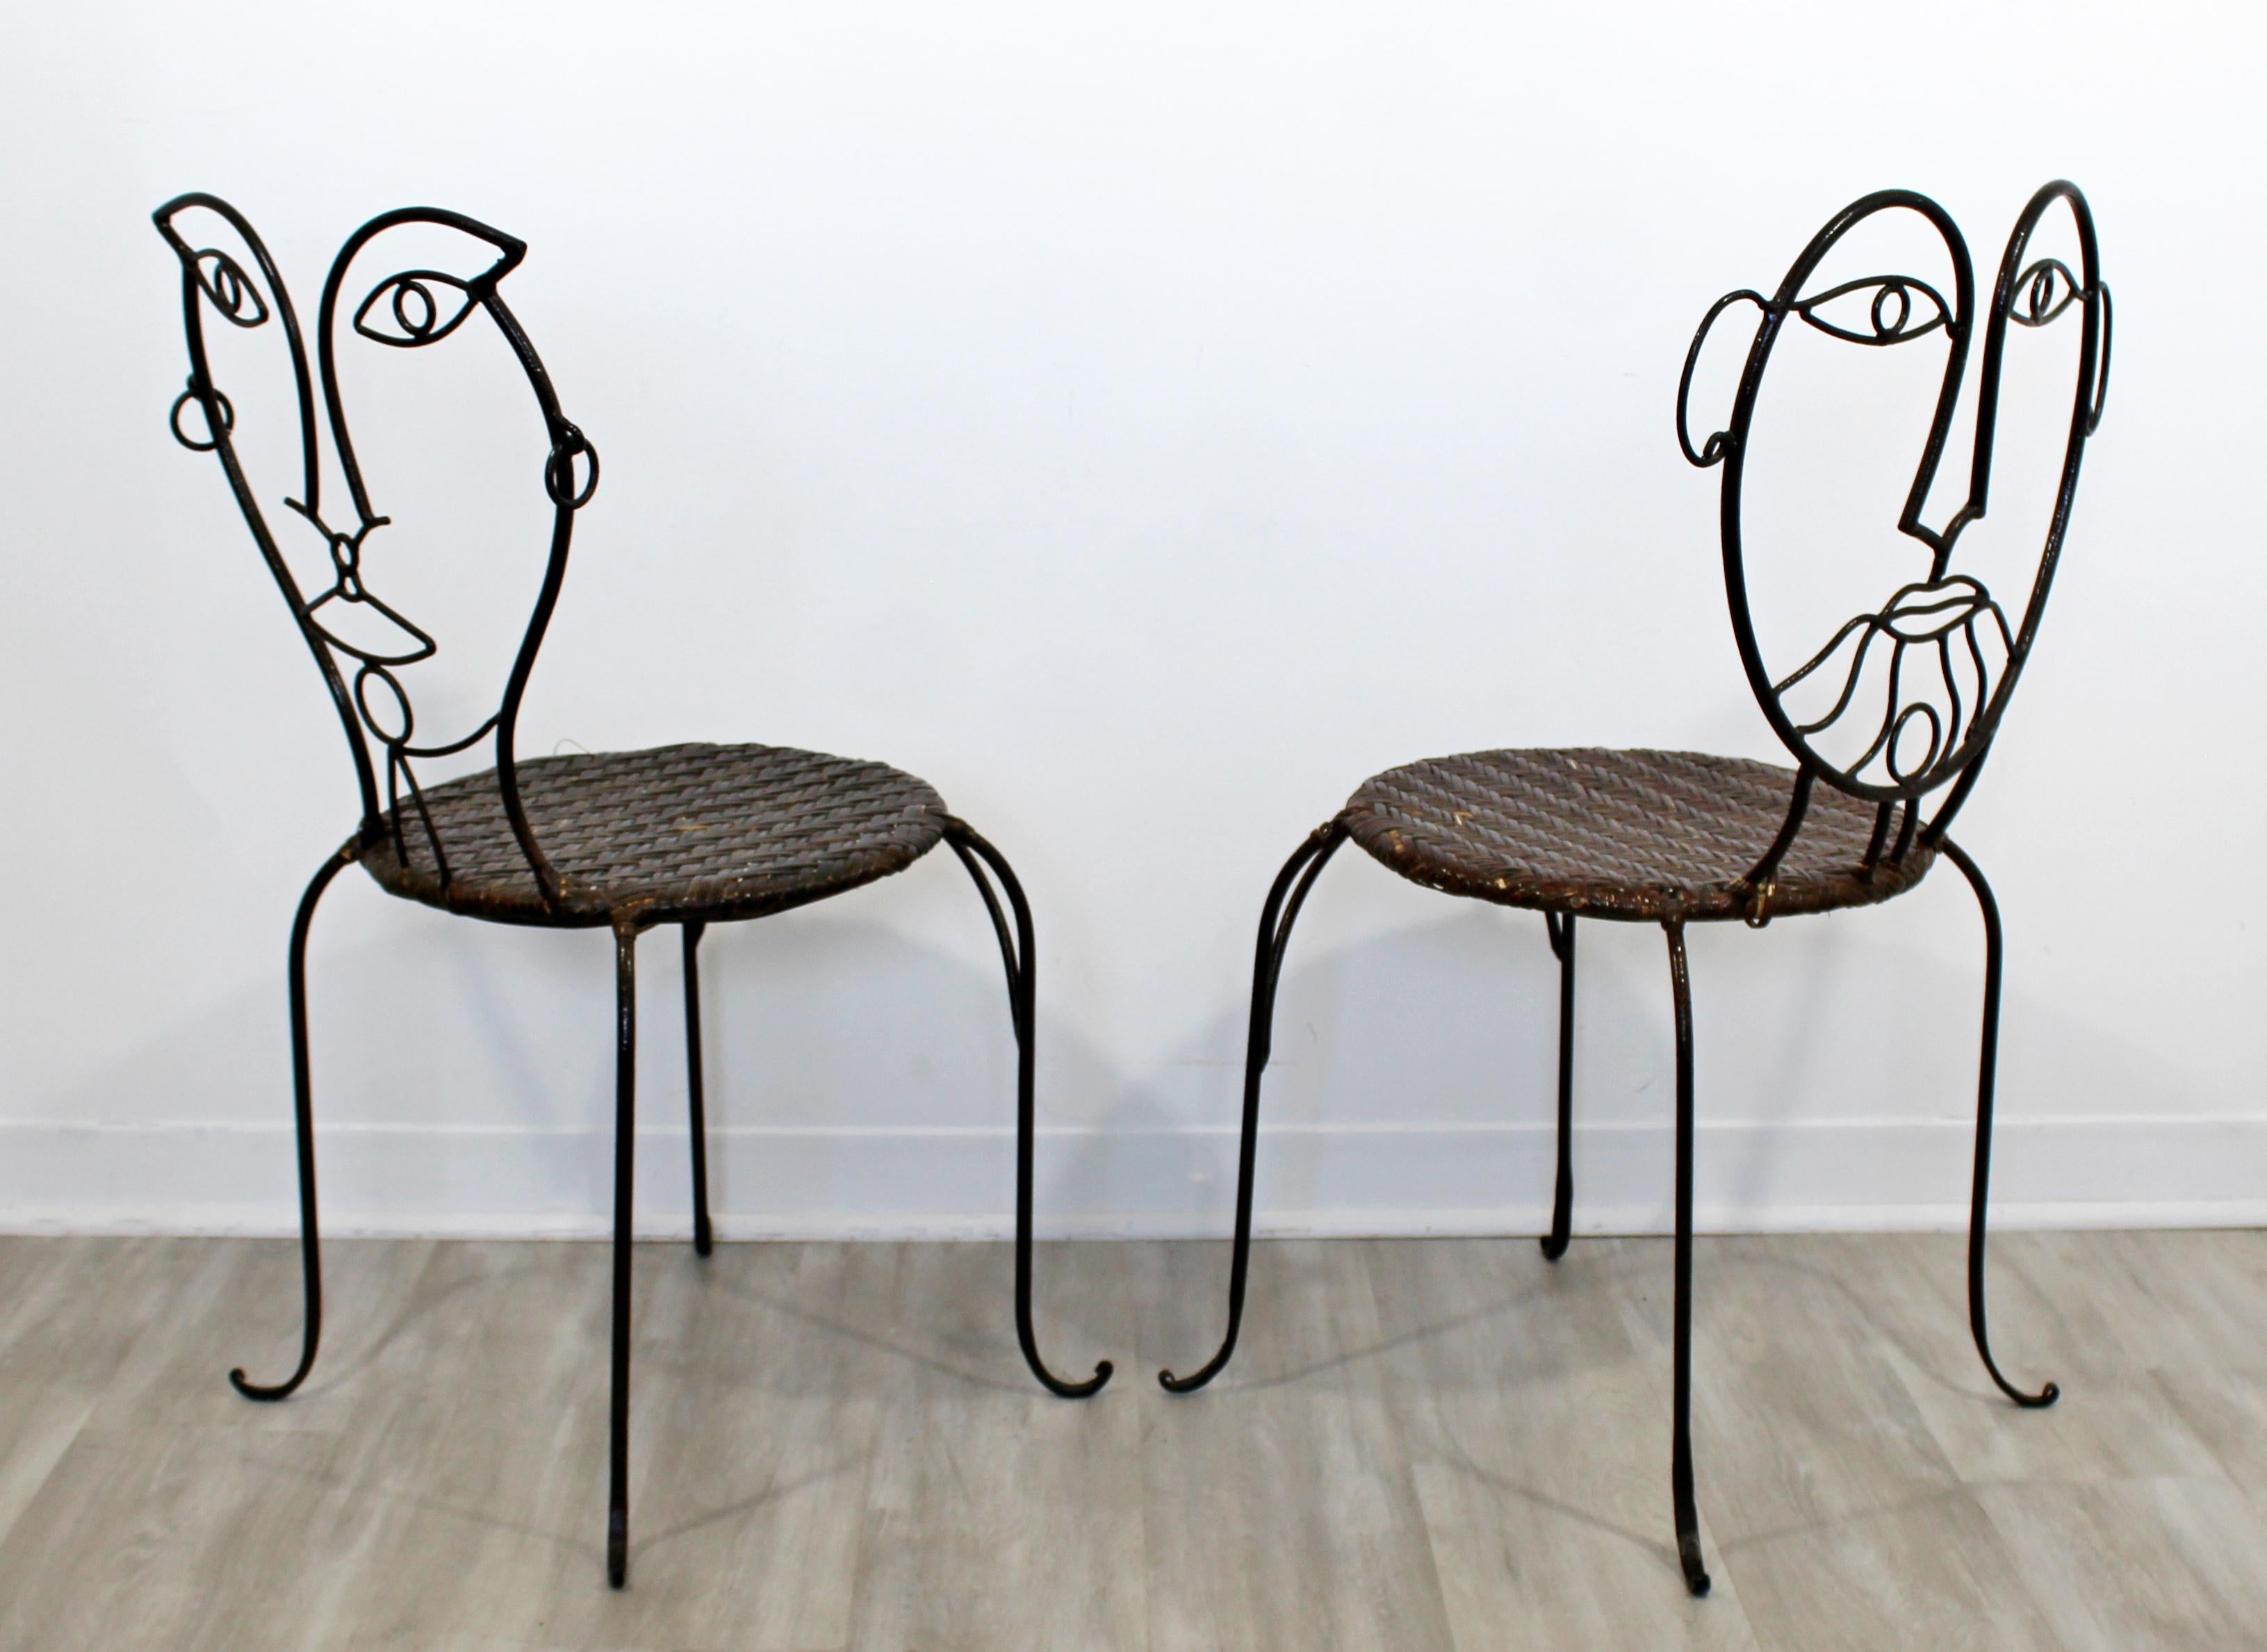 Contemporary Modern Pair of Wrought Iron and Rattan Cafe Art Chairs Faces, 1990s 1